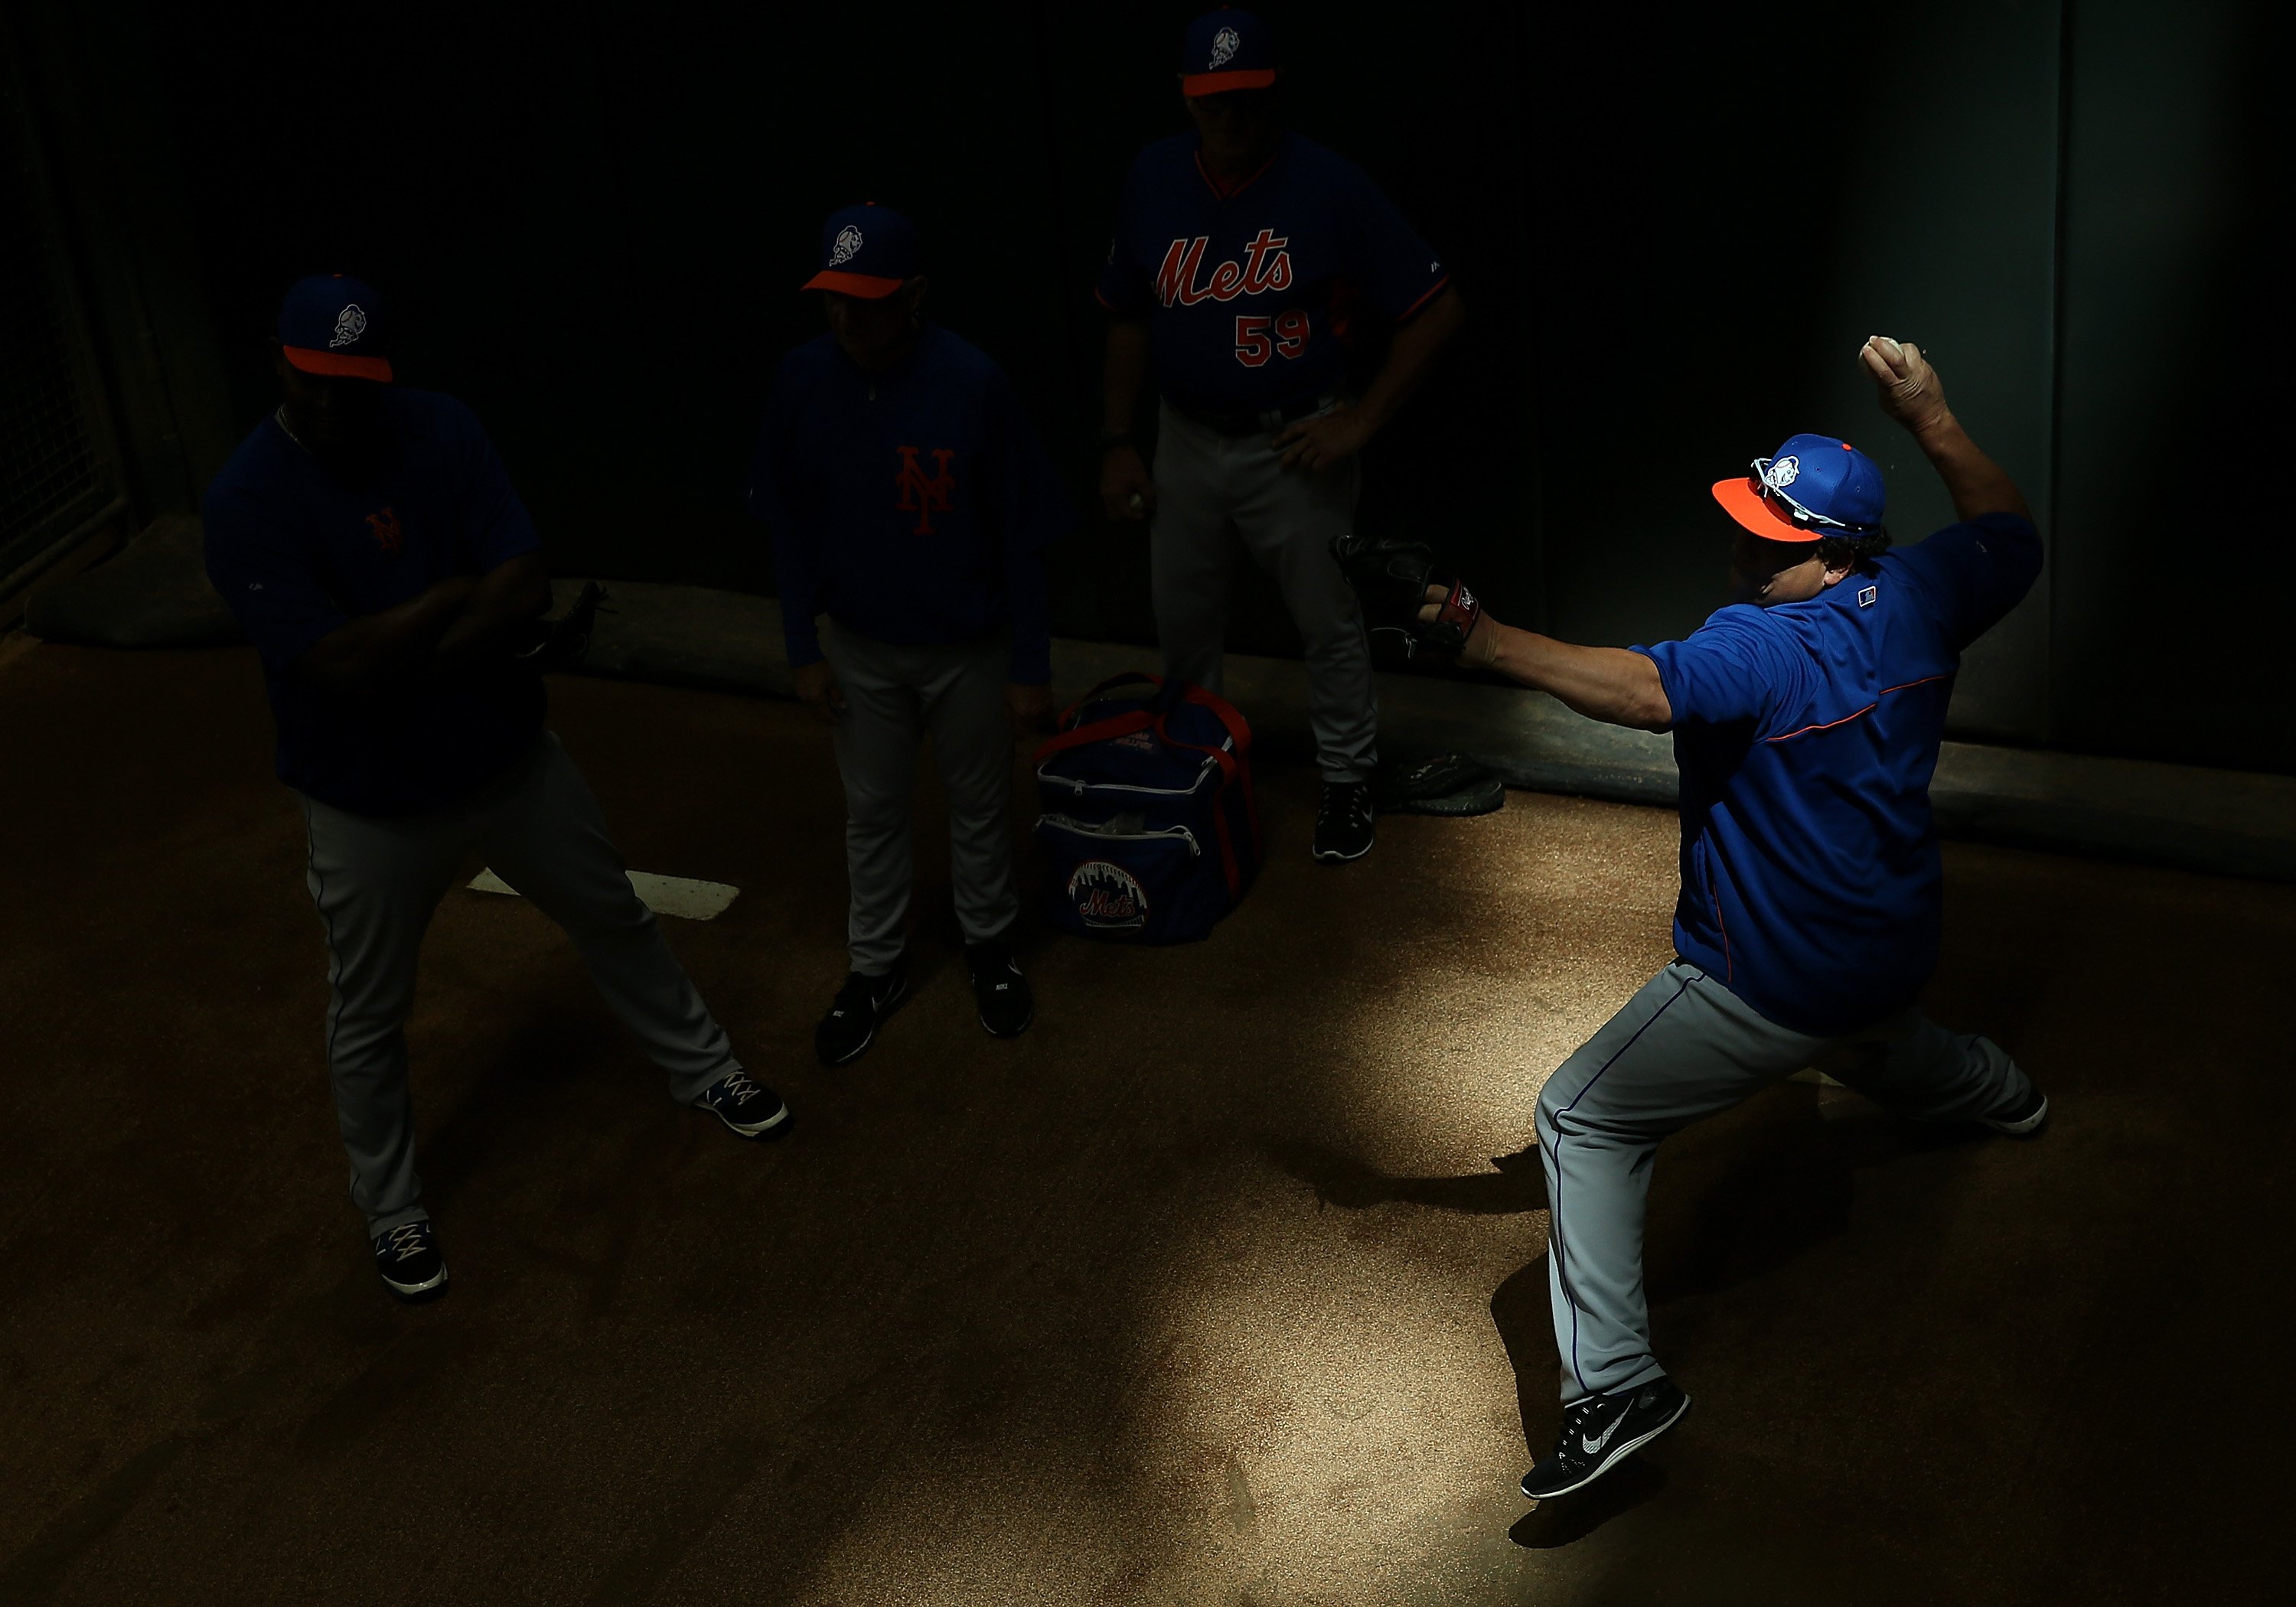 Apr. 16, 2014. Pitcher Bartolo Colon #40 of the New York Mets throws in the bullpen before the MLB game against the Arizona Diamondbacks at Chase Field in Phoenix, Arizona.